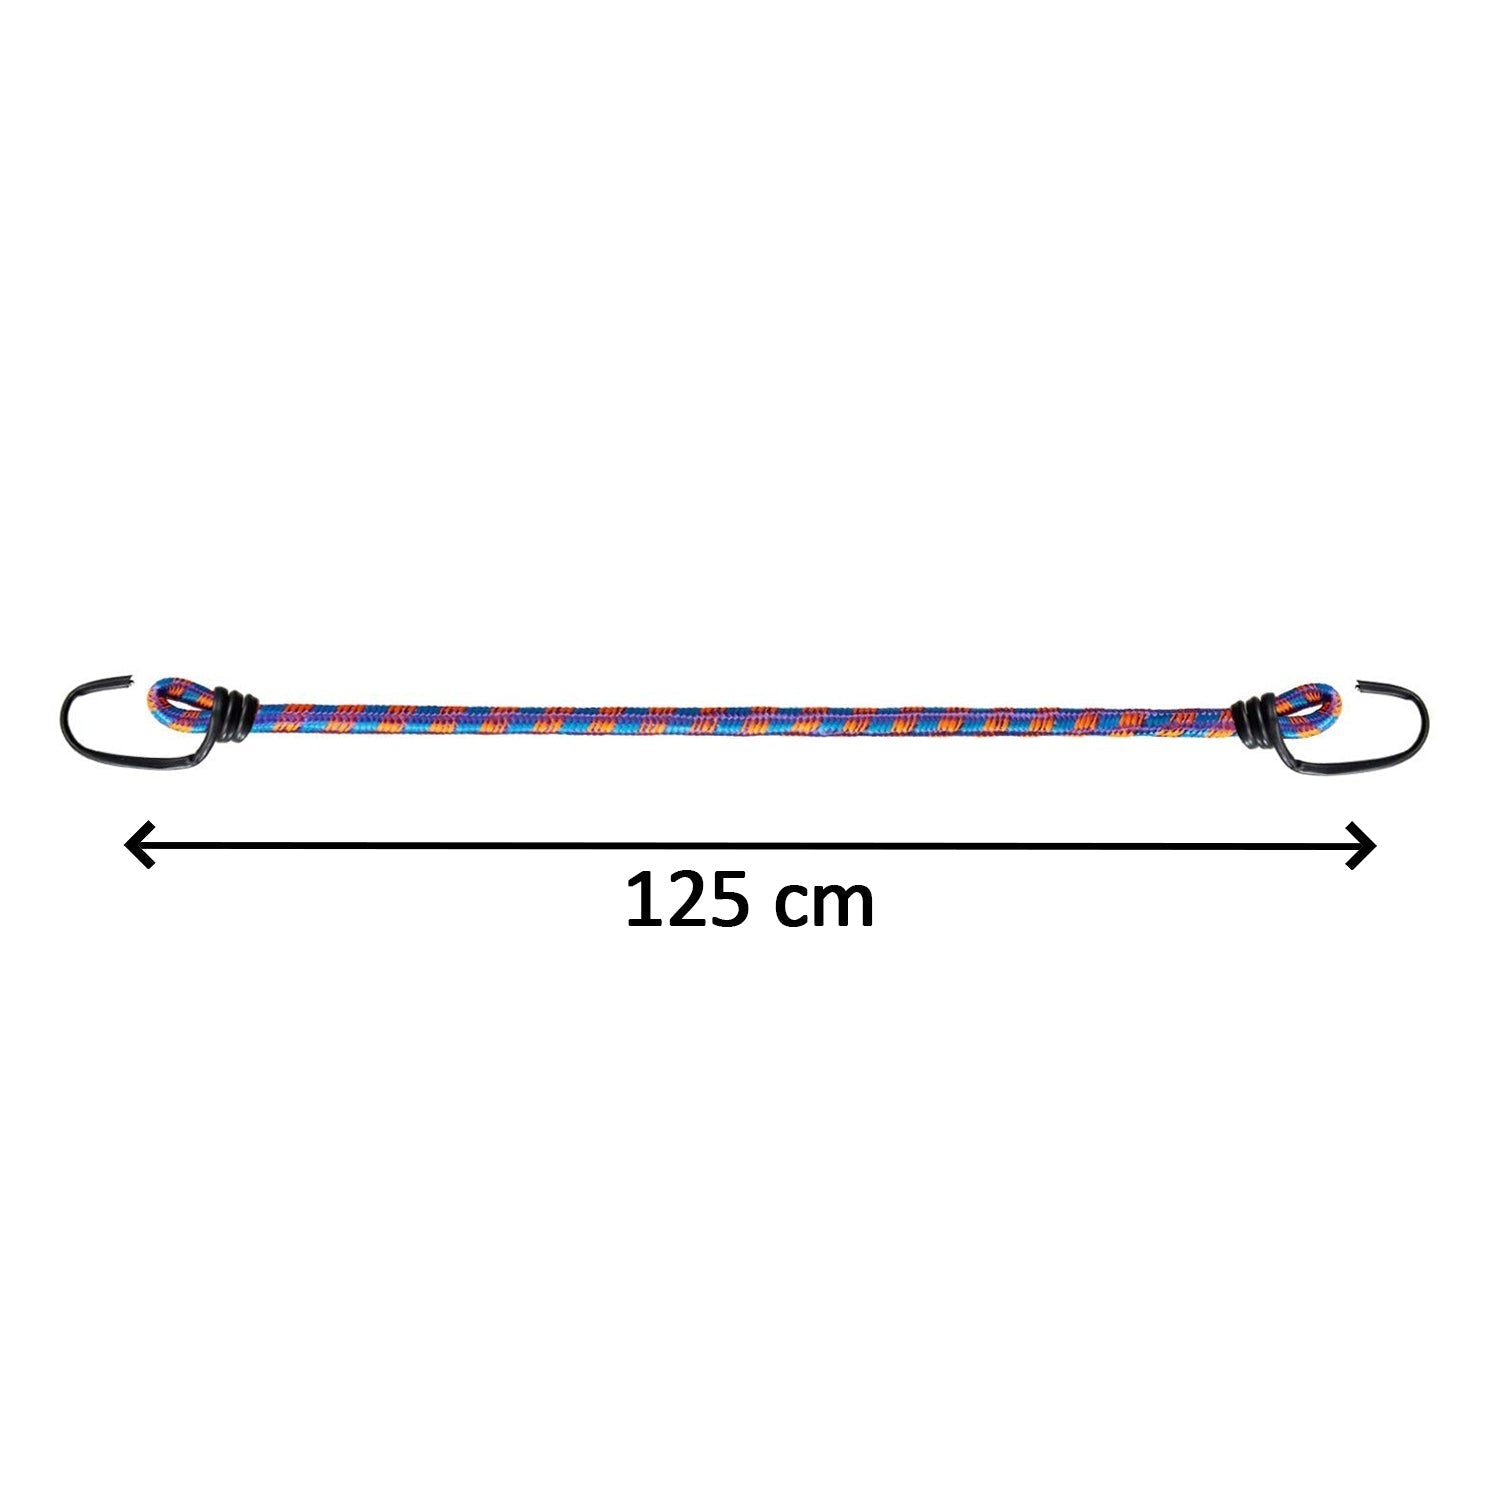 9008 Bungee Rope 4 Feet for holding and supporting things including all types of purposes.